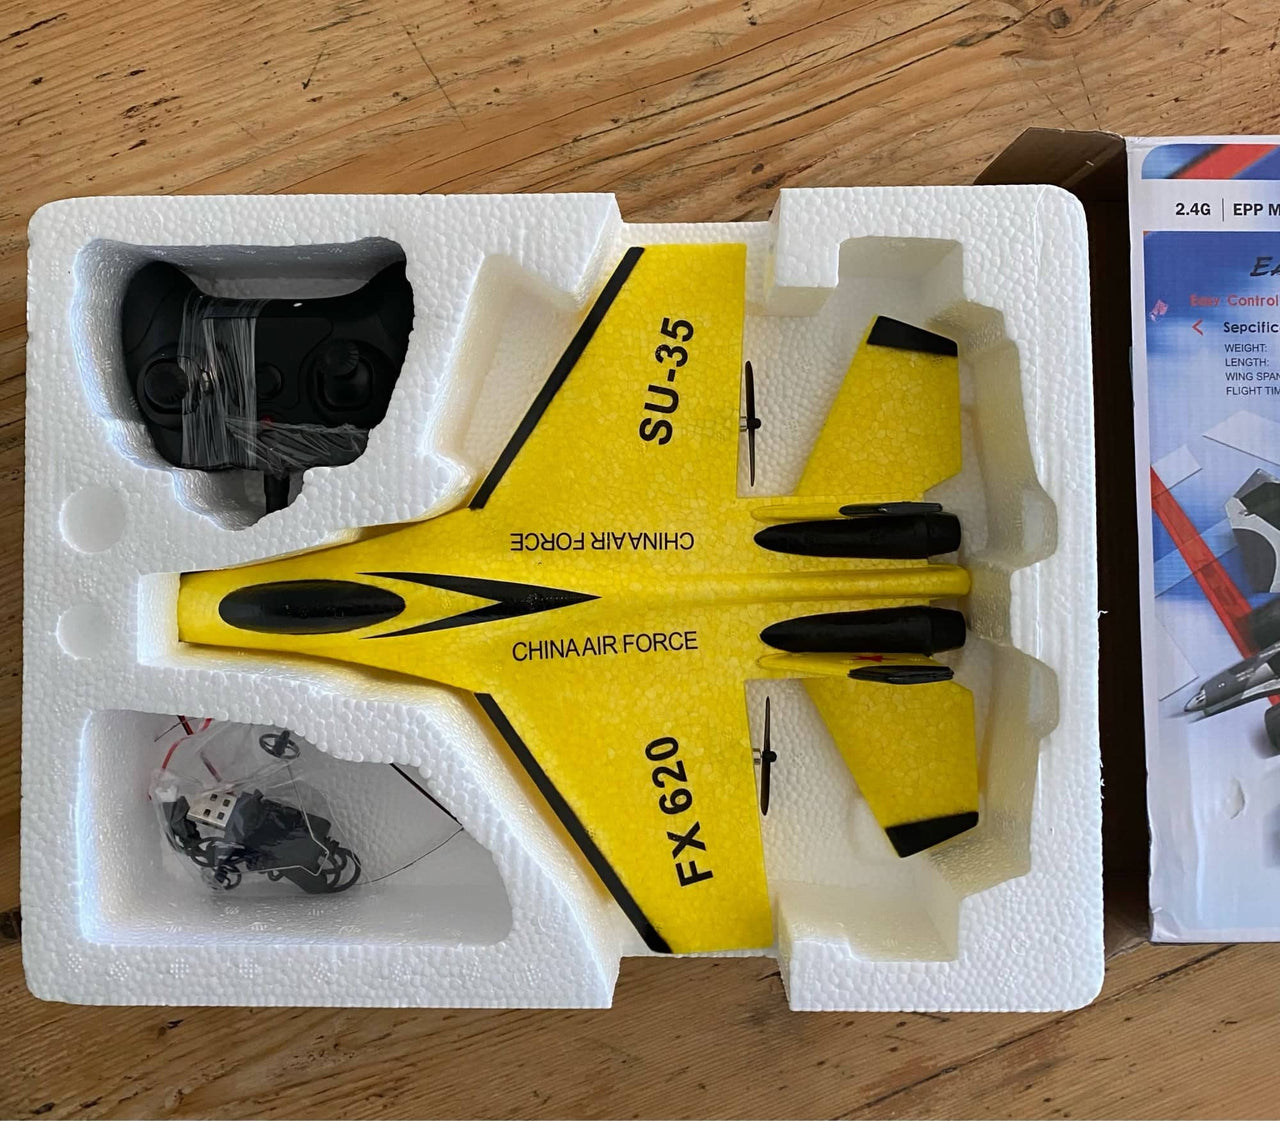 Remote Controlled Wireless Airplane Toy